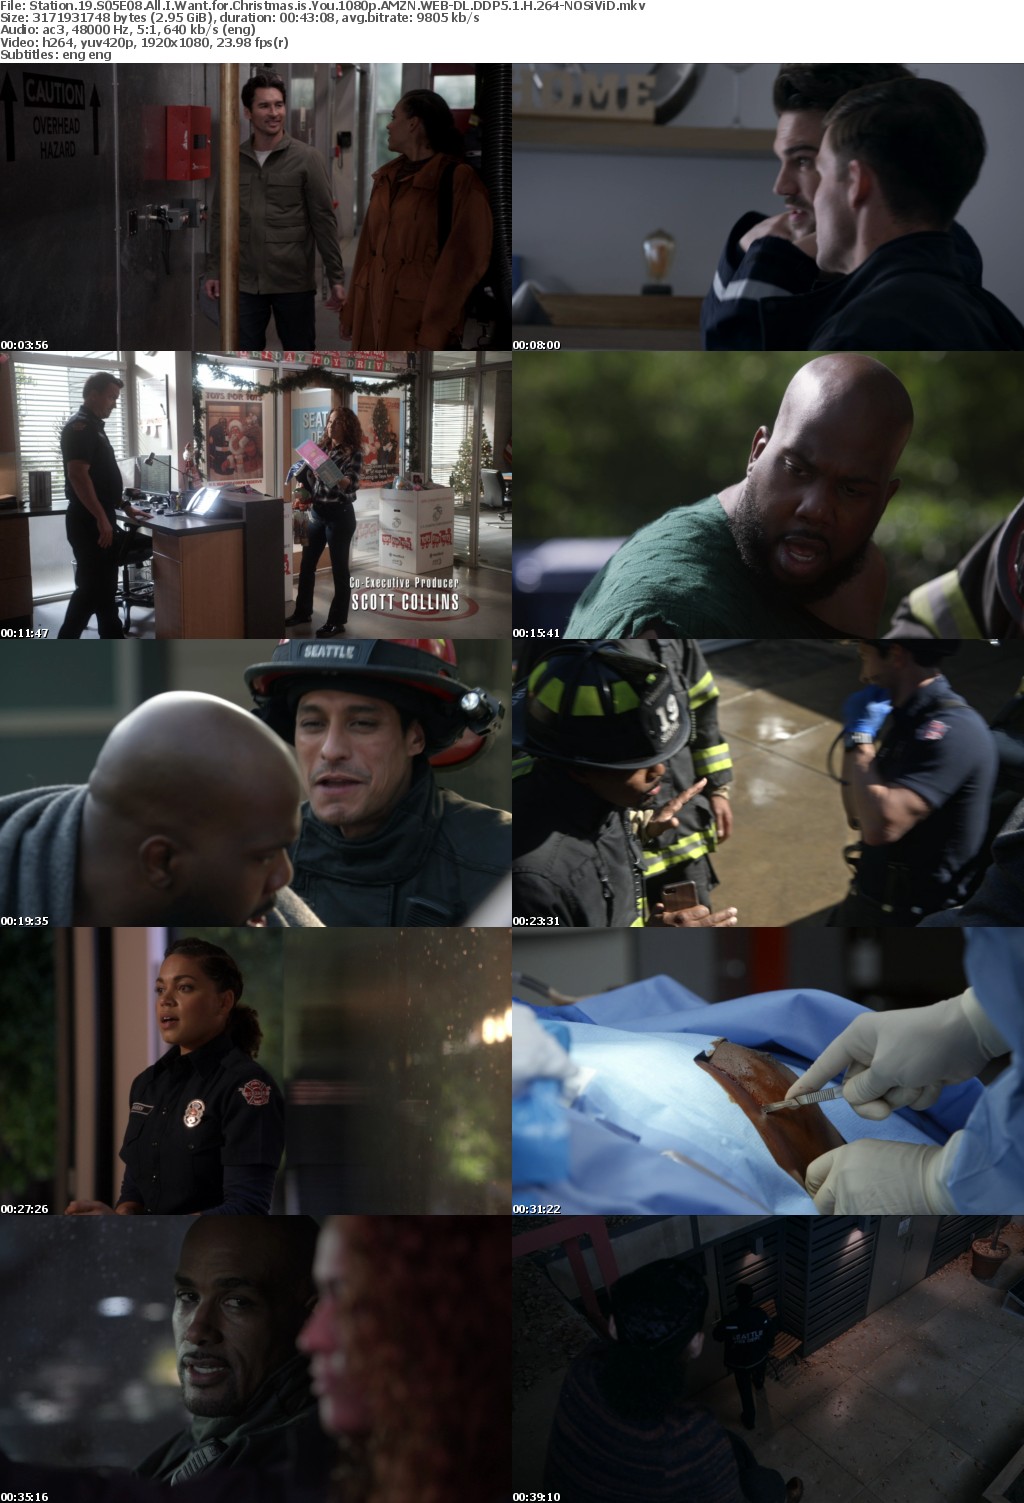 Station 19 S05E08 All I Want for Christmas is You 1080p AMZN WEBRip DDP5 1 x264-NOSiViD